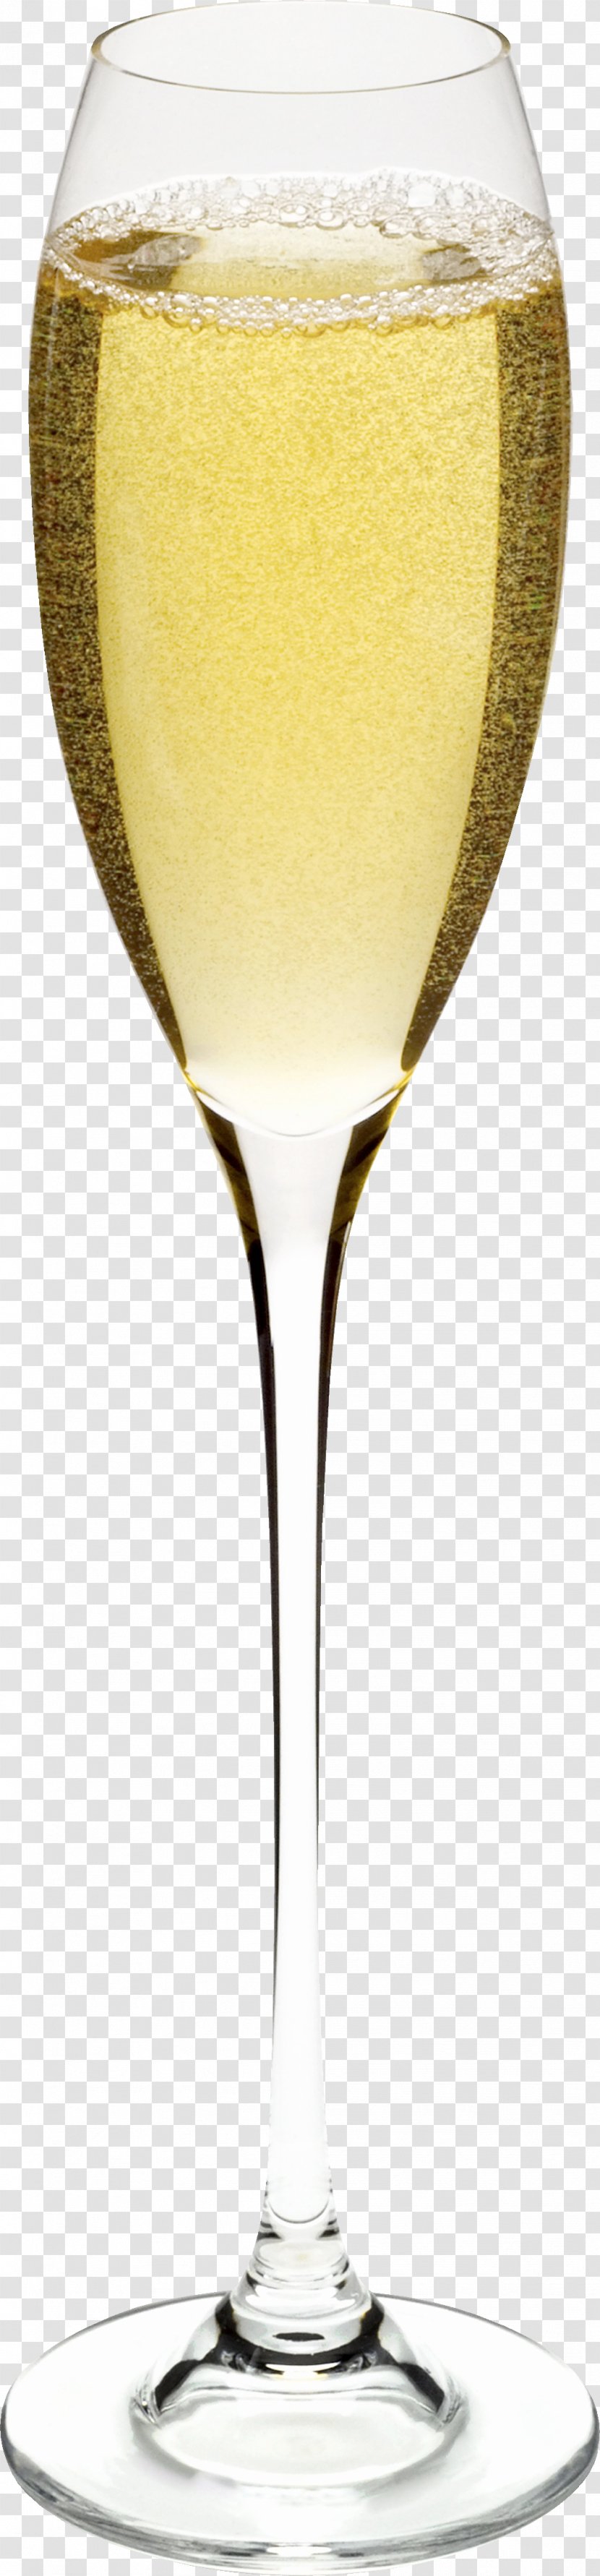 Champagne Glass Sparkling Wine - Red - Image Transparent PNG